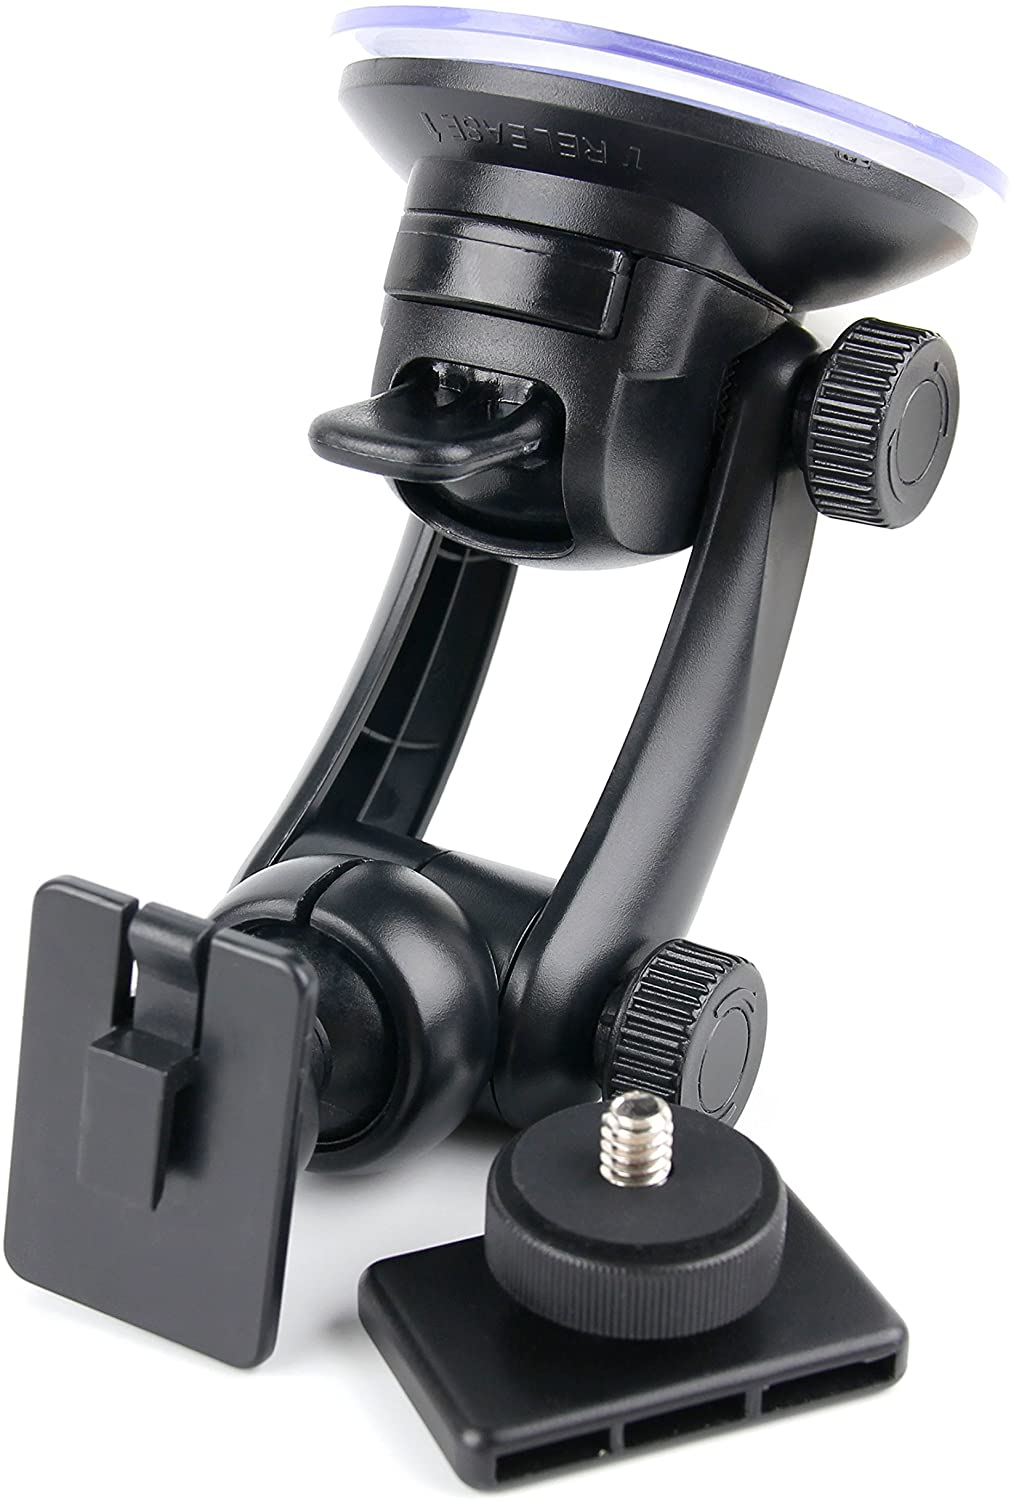 DURAGADGET Sturdy And Durable Anti-Shake Window Suction Mount For The Transcend DrivePro 200